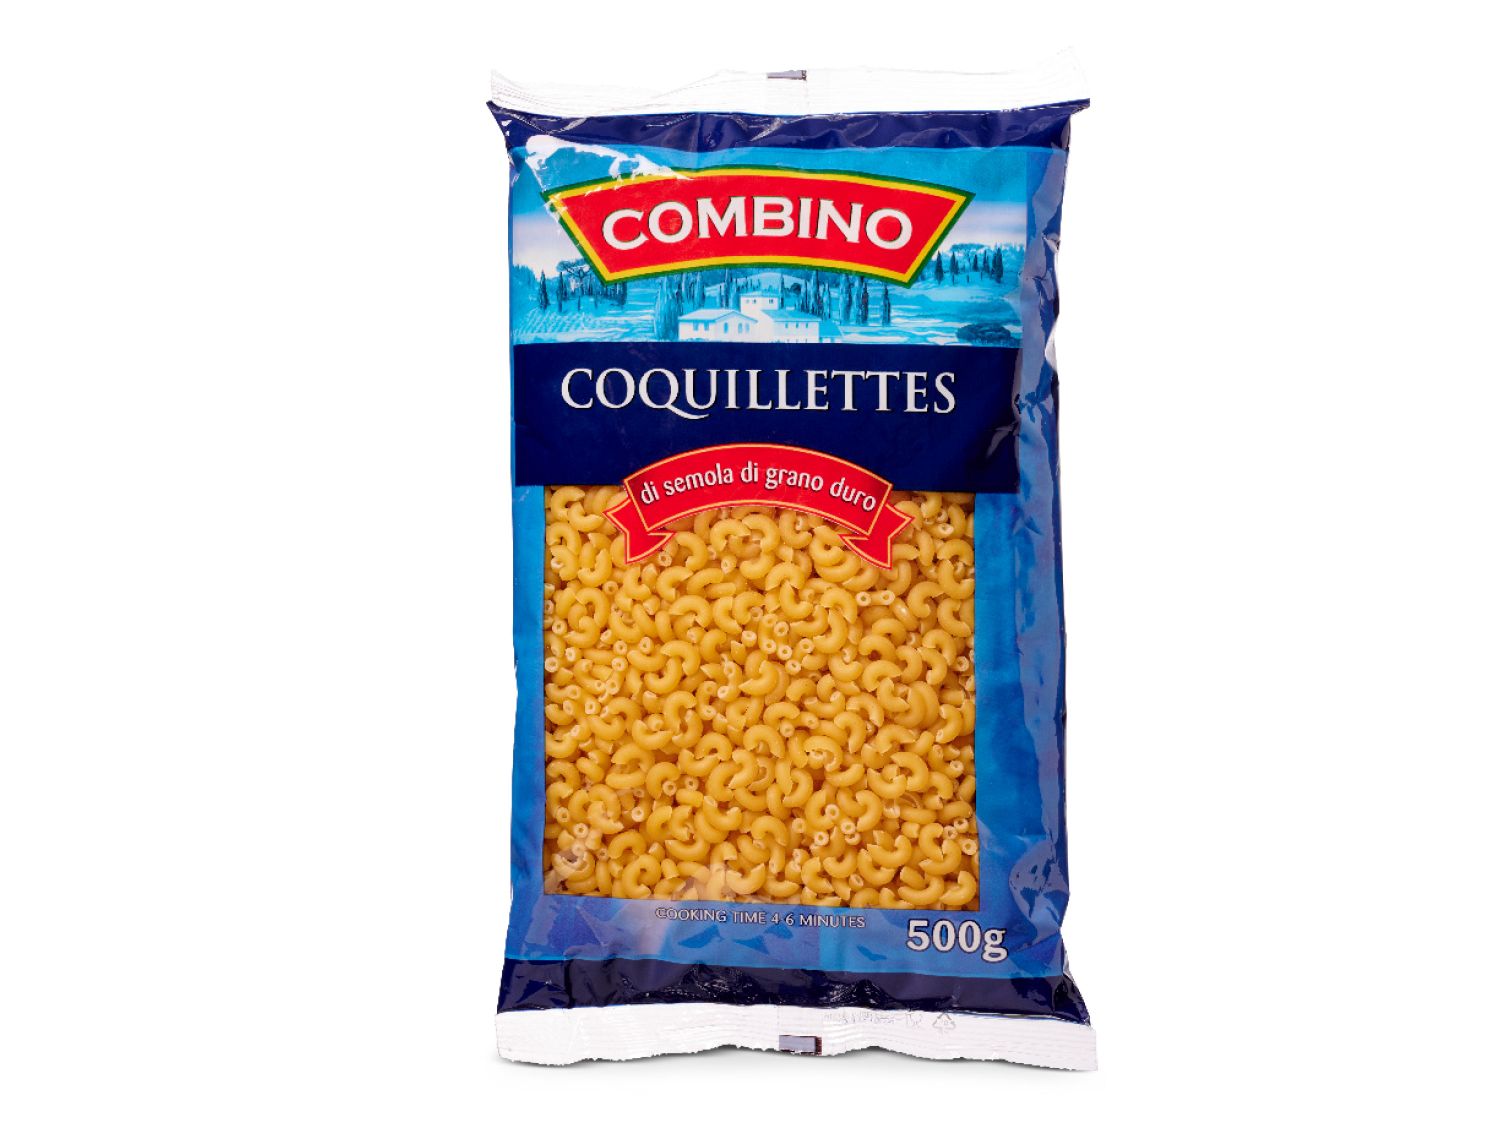 Coquillettes - Combino - 500 g